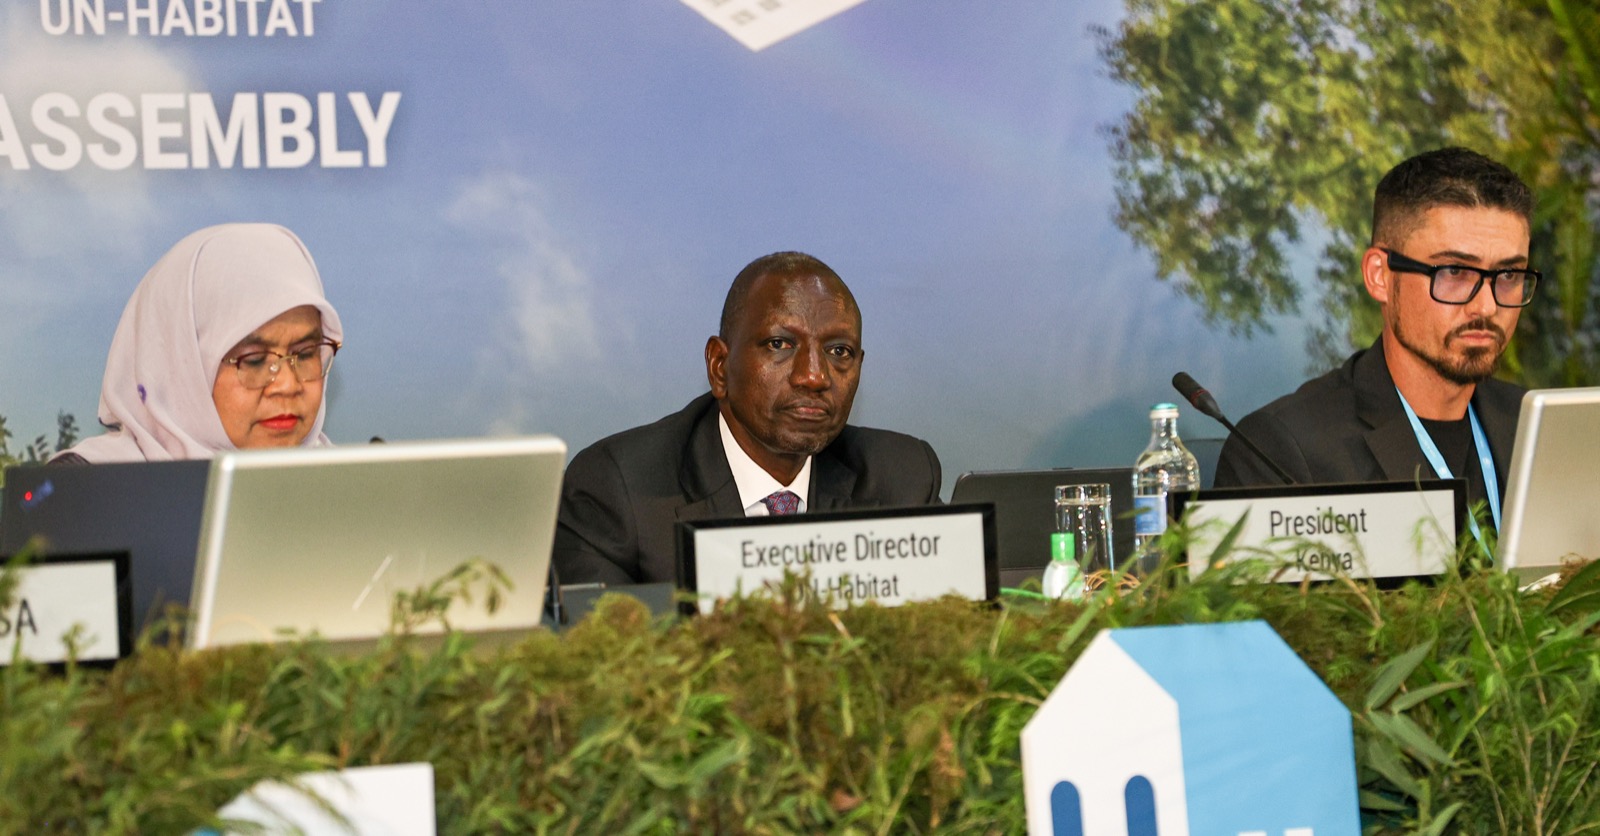 President Ruto at the UN Complex in Nairobi during the opening of the Second Session of the United Nations Habitat Assembly.